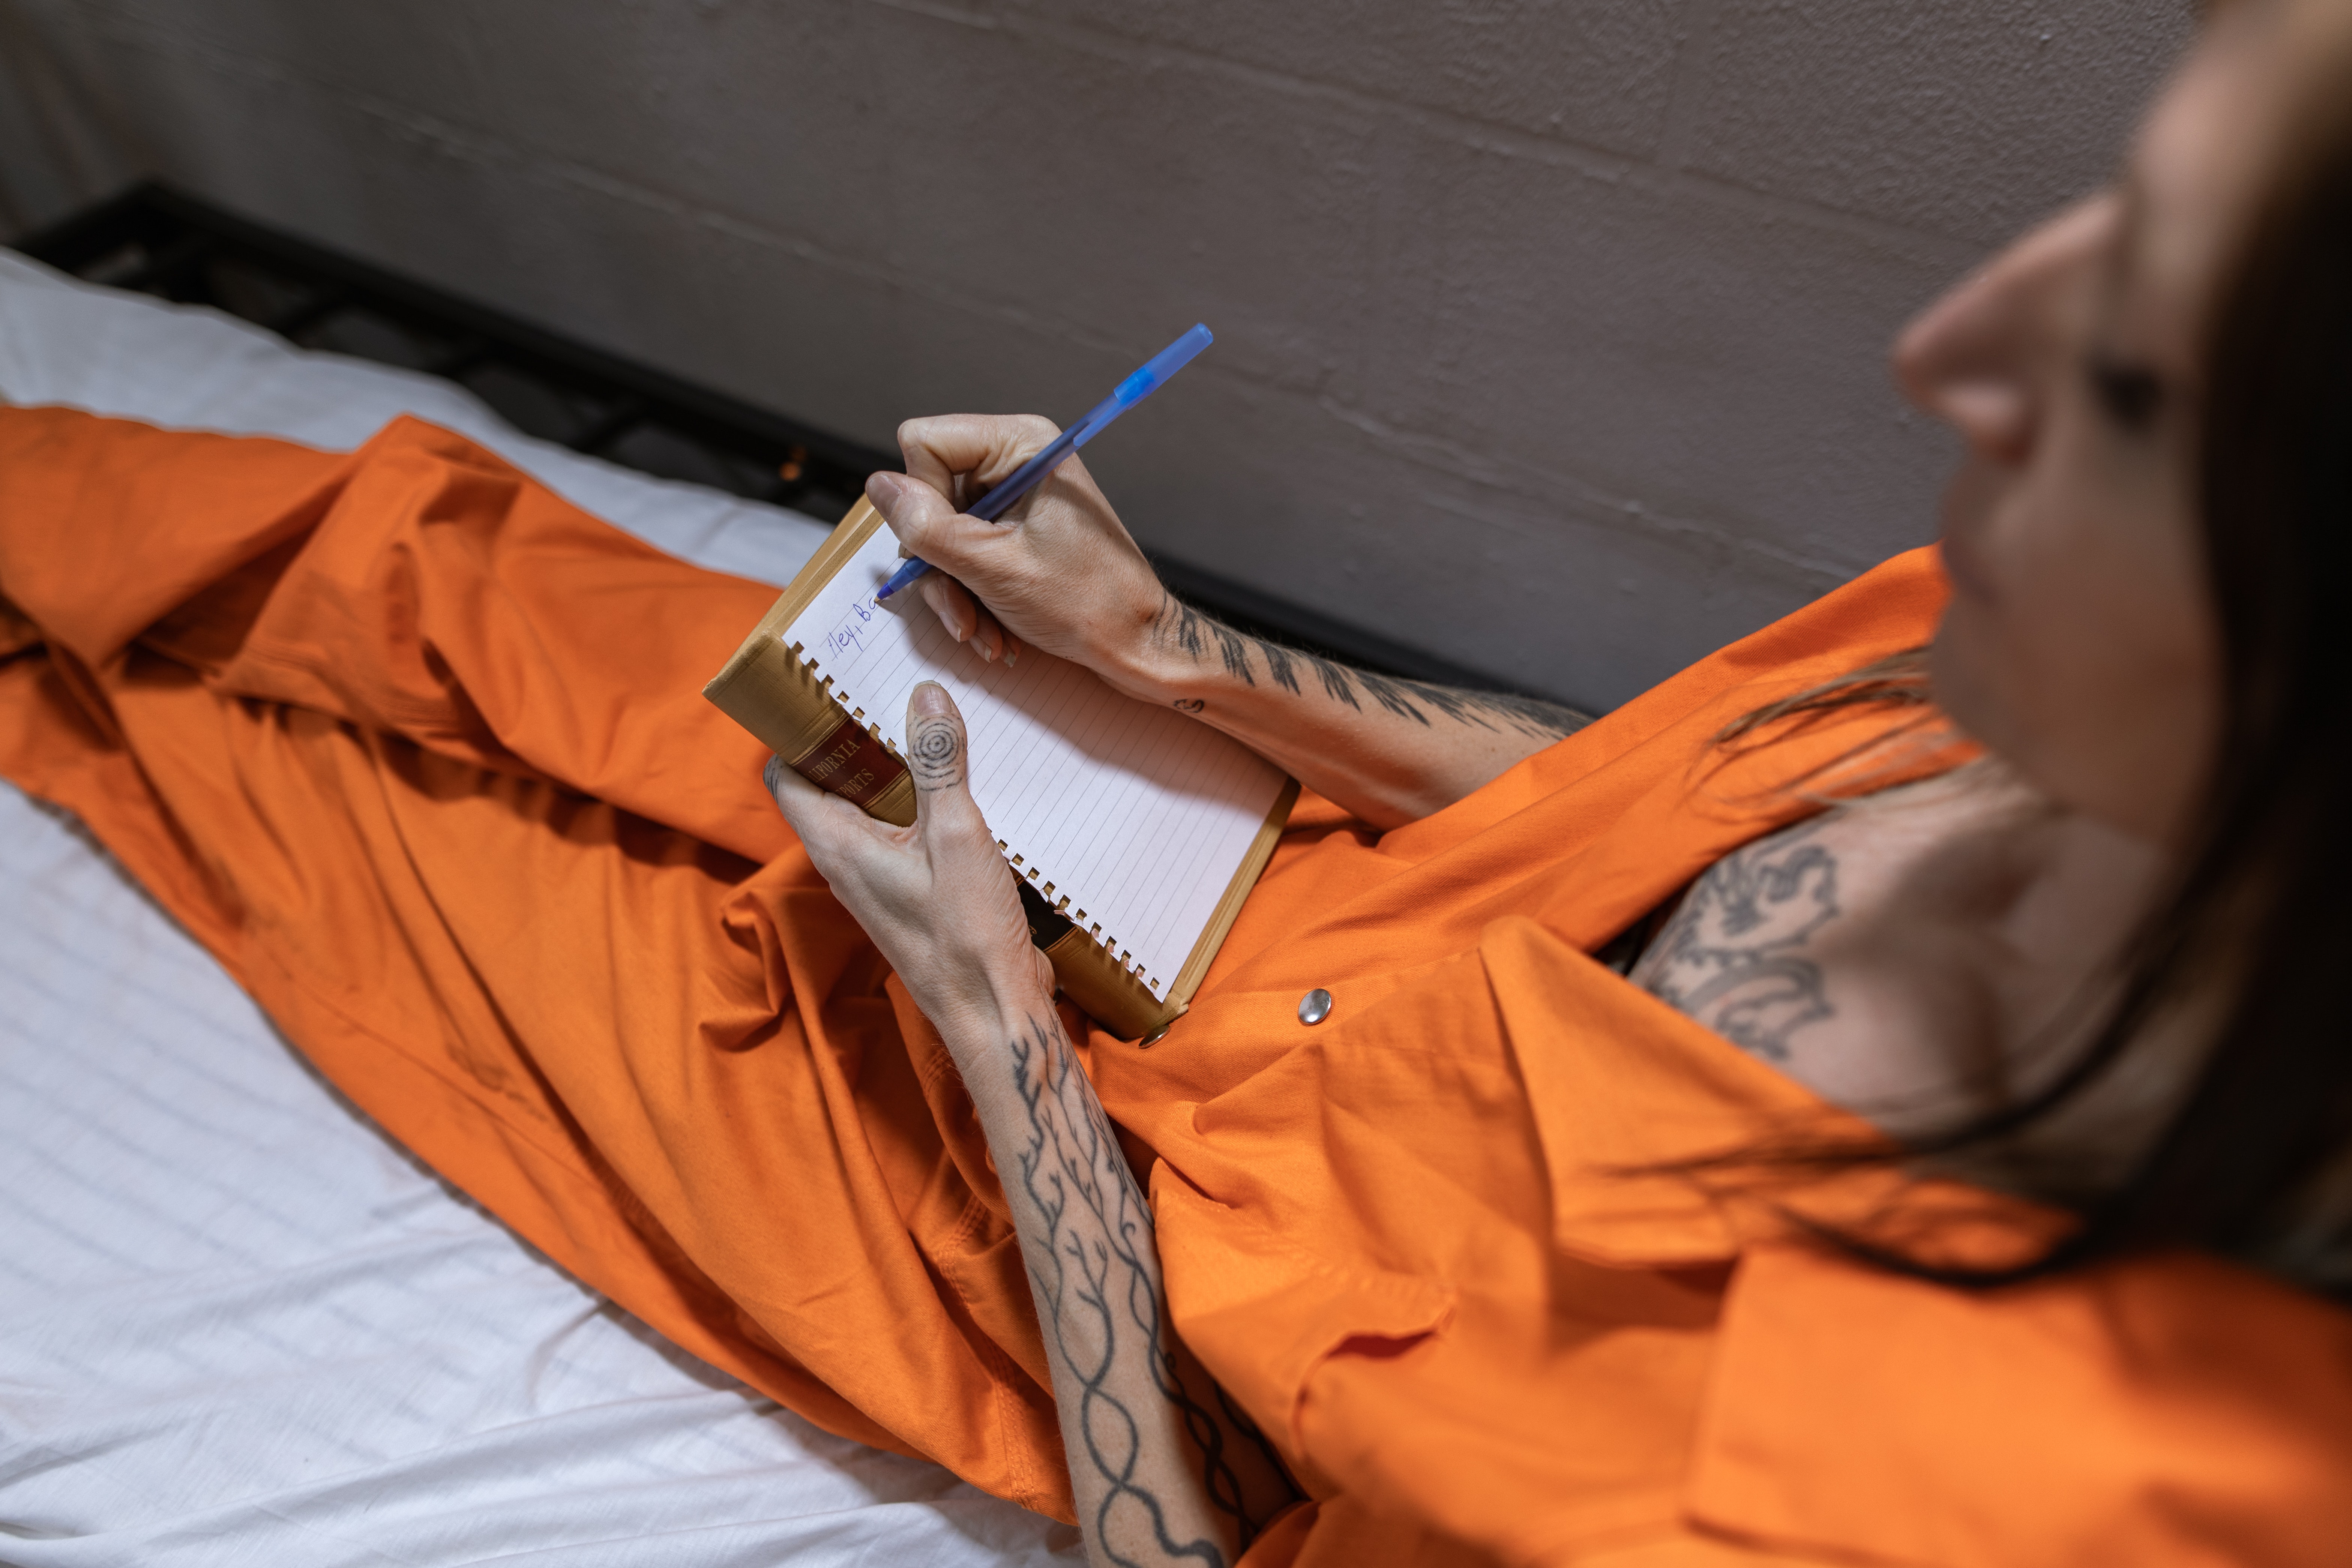 The man found a site that allowed you to write to inmates. | Source: Pexels